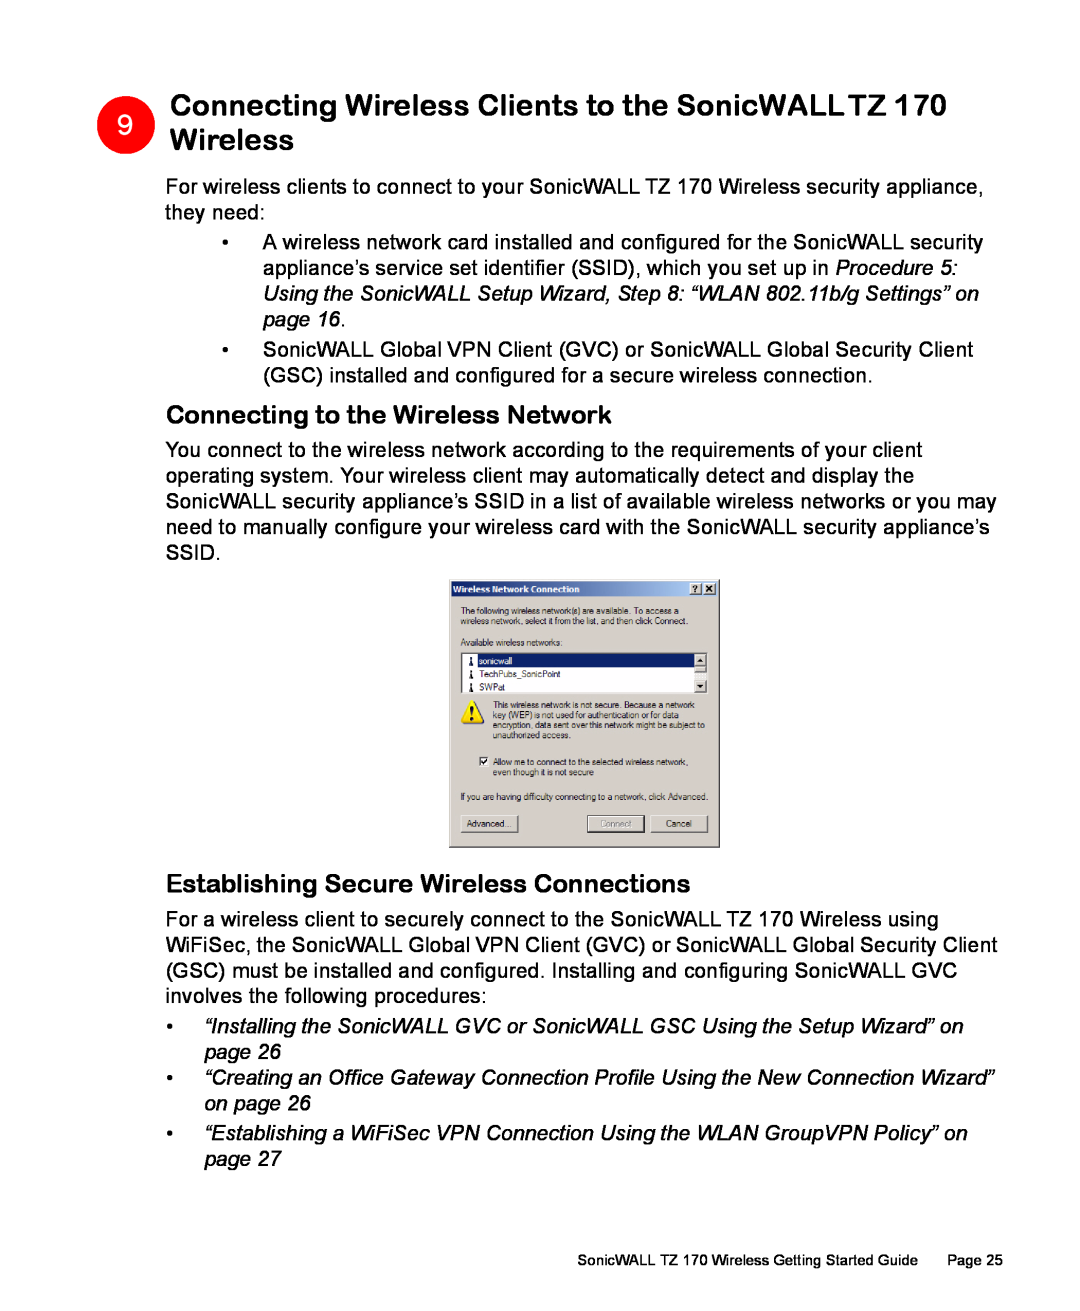 SonicWALL 170 manual Connecting to the Wireless Network, Establishing Secure Wireless Connections 